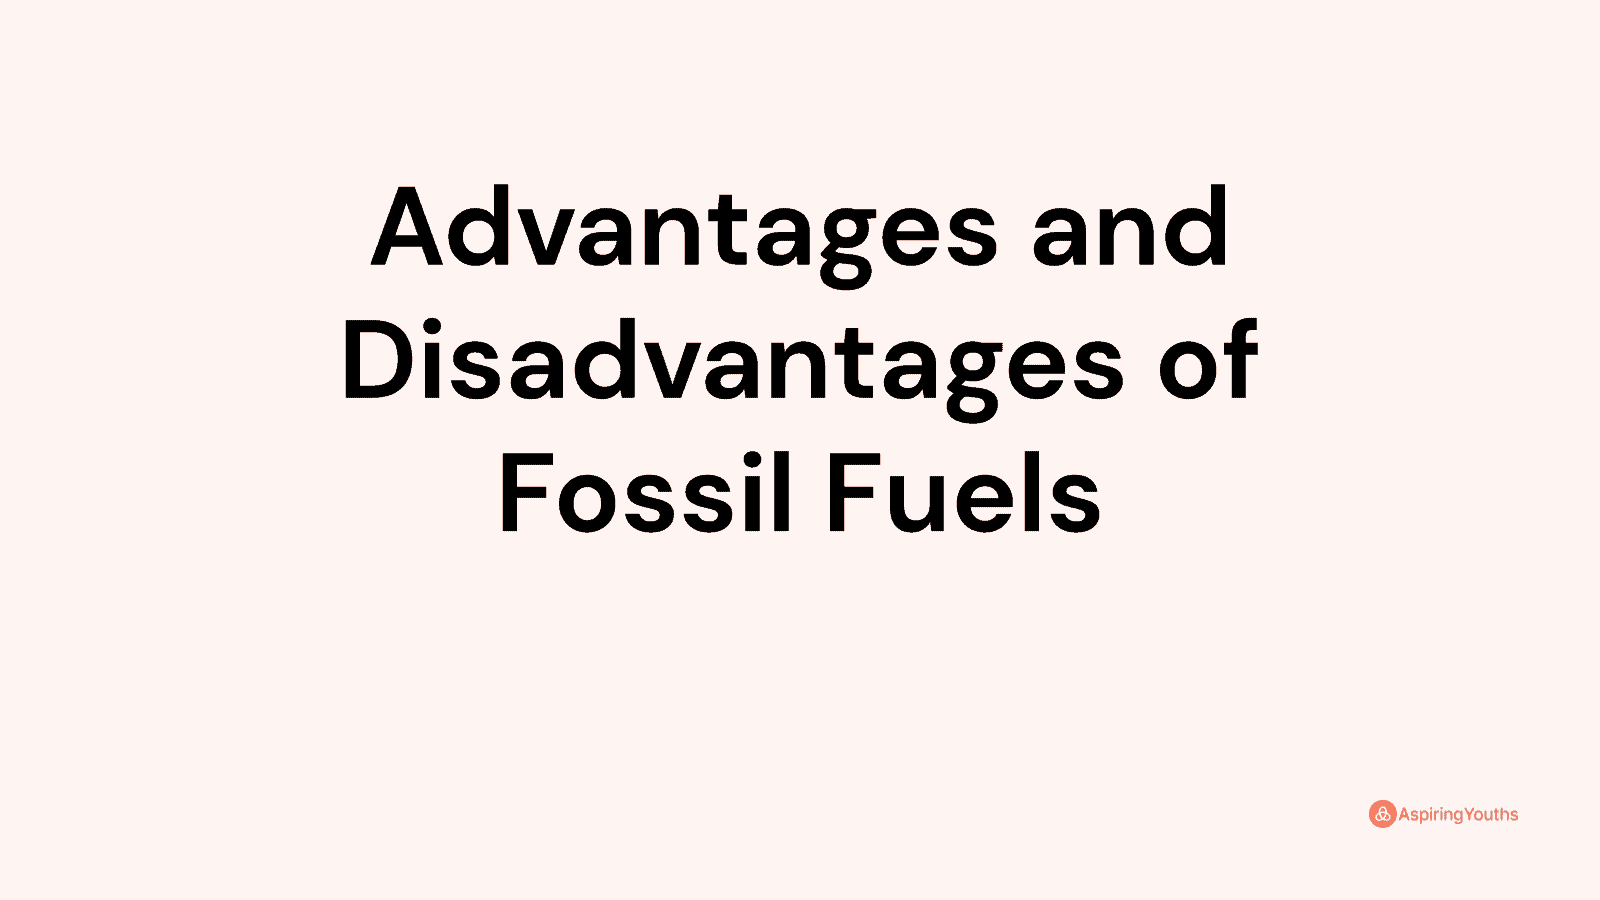 Advantages and disadvantages of Fossil Fuels